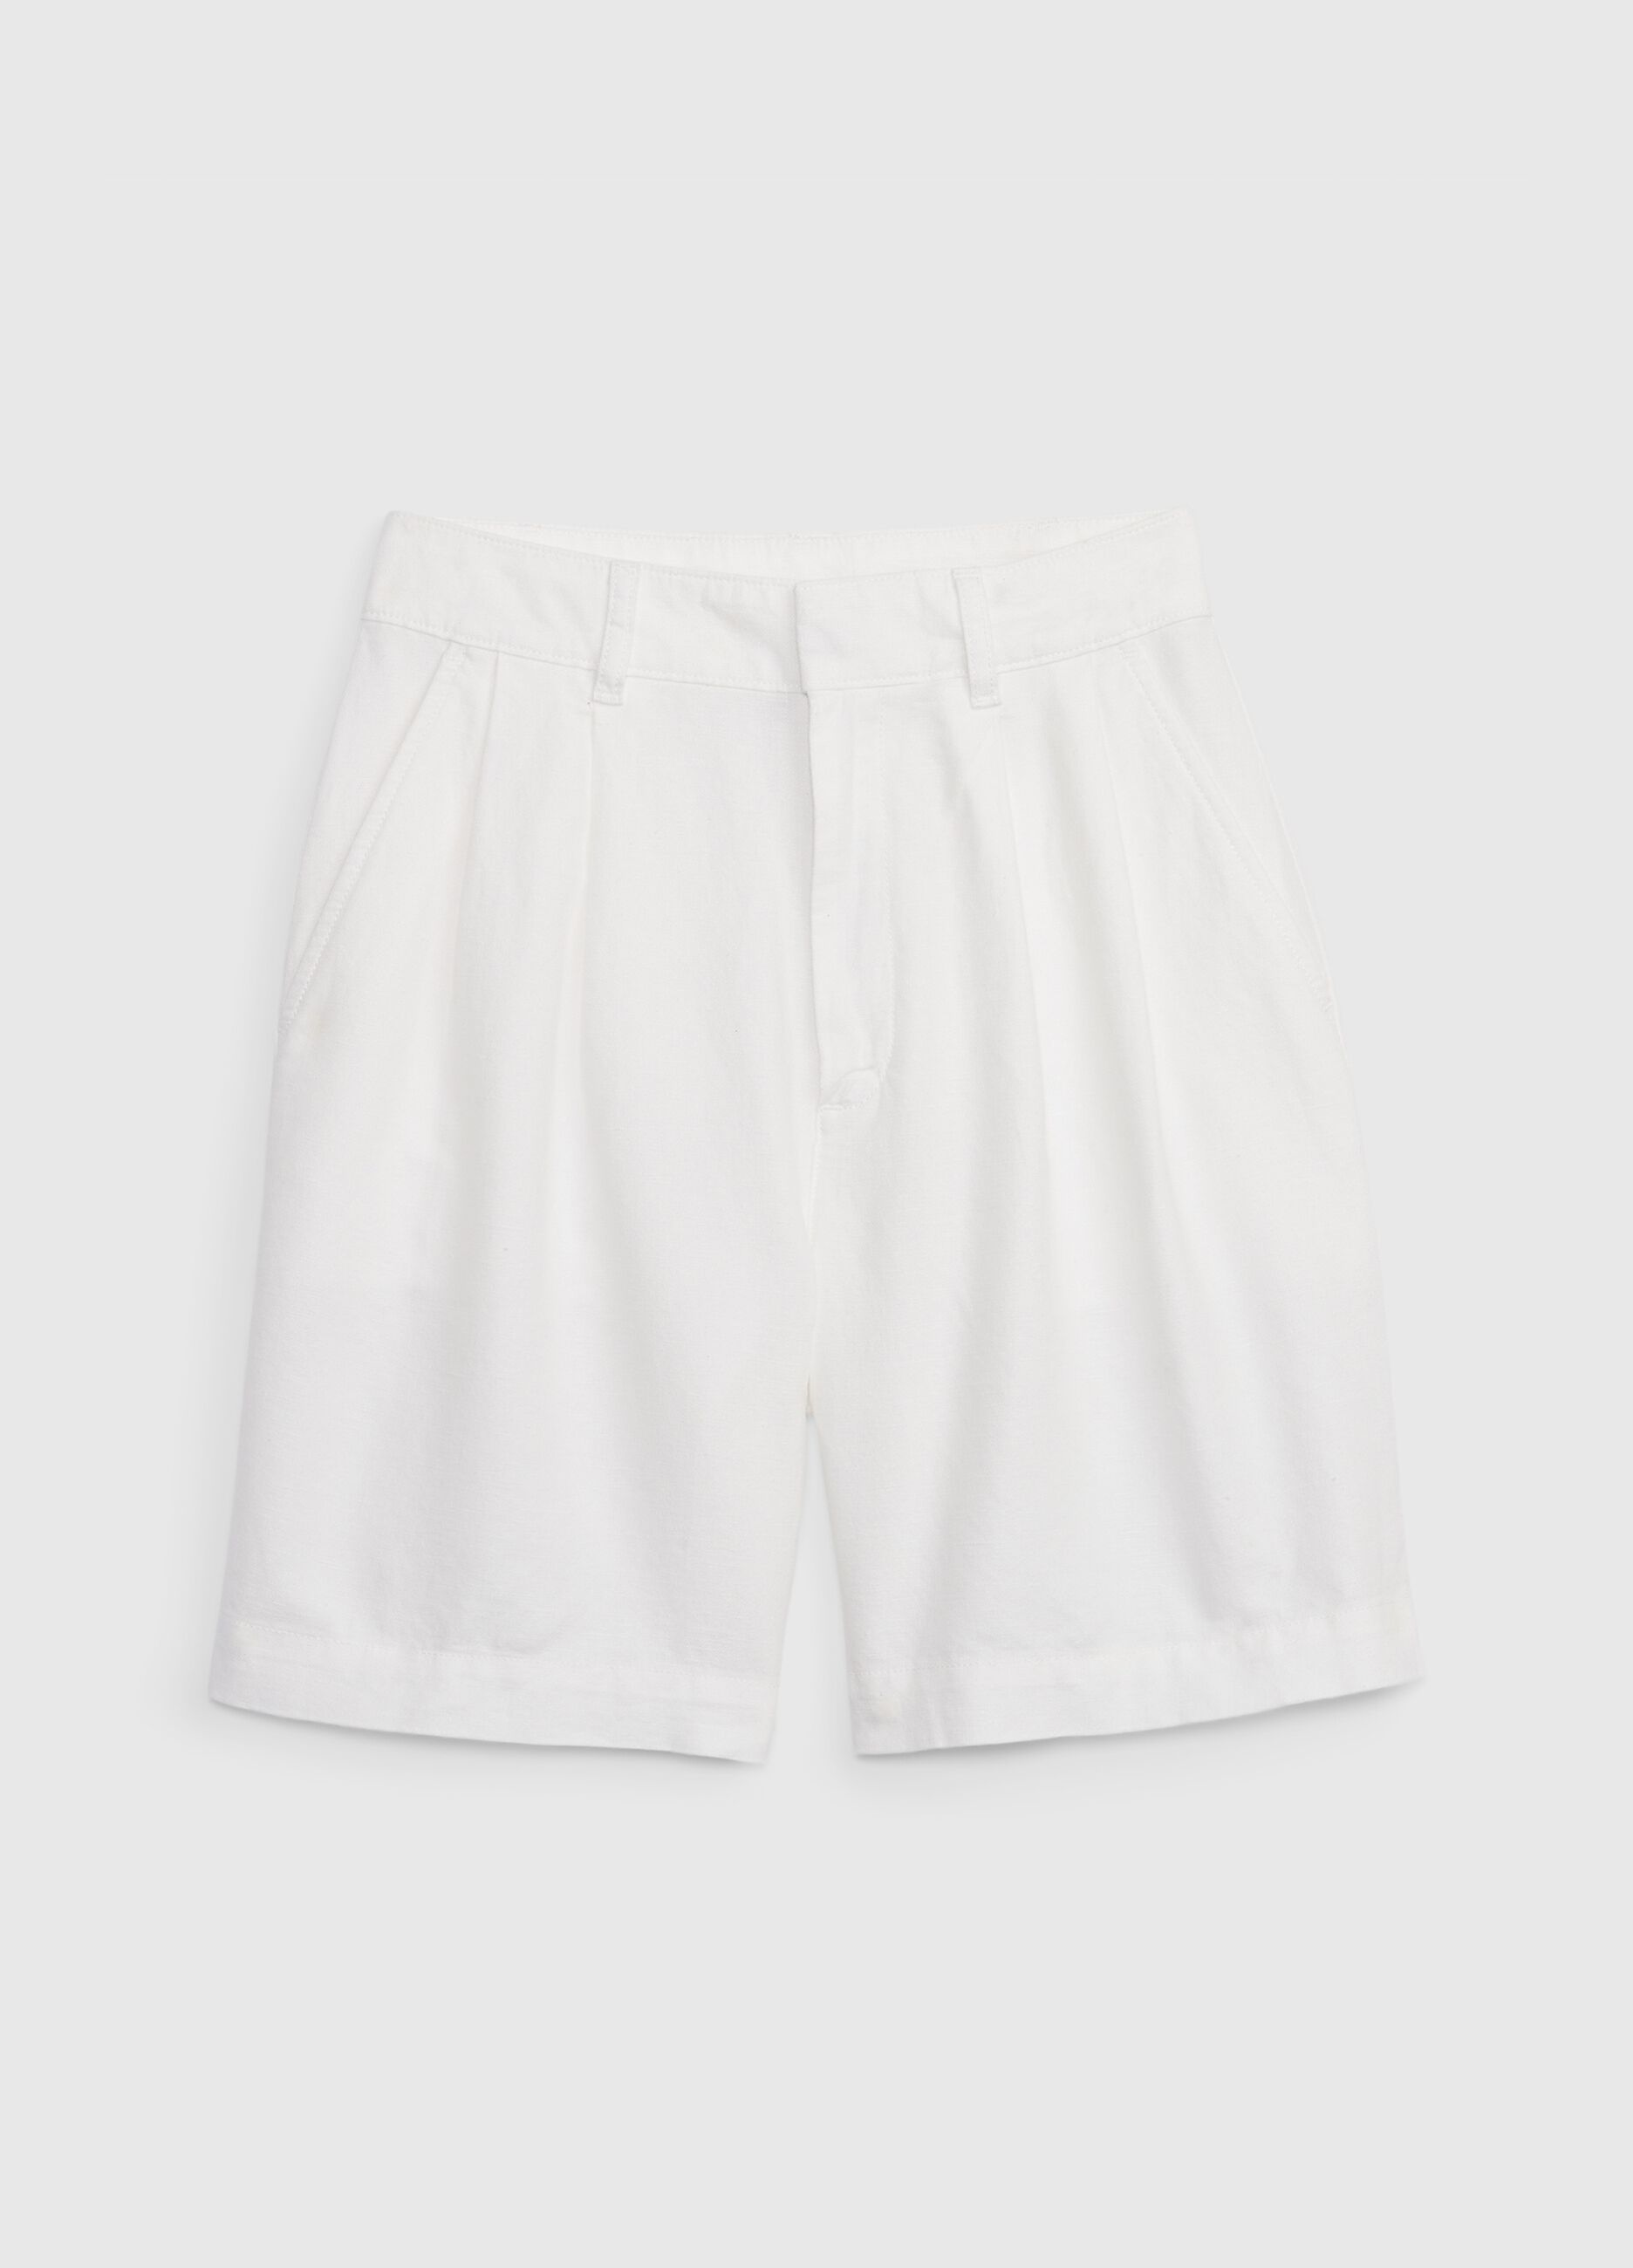 Bermuda shorts in linen and cotton with darts